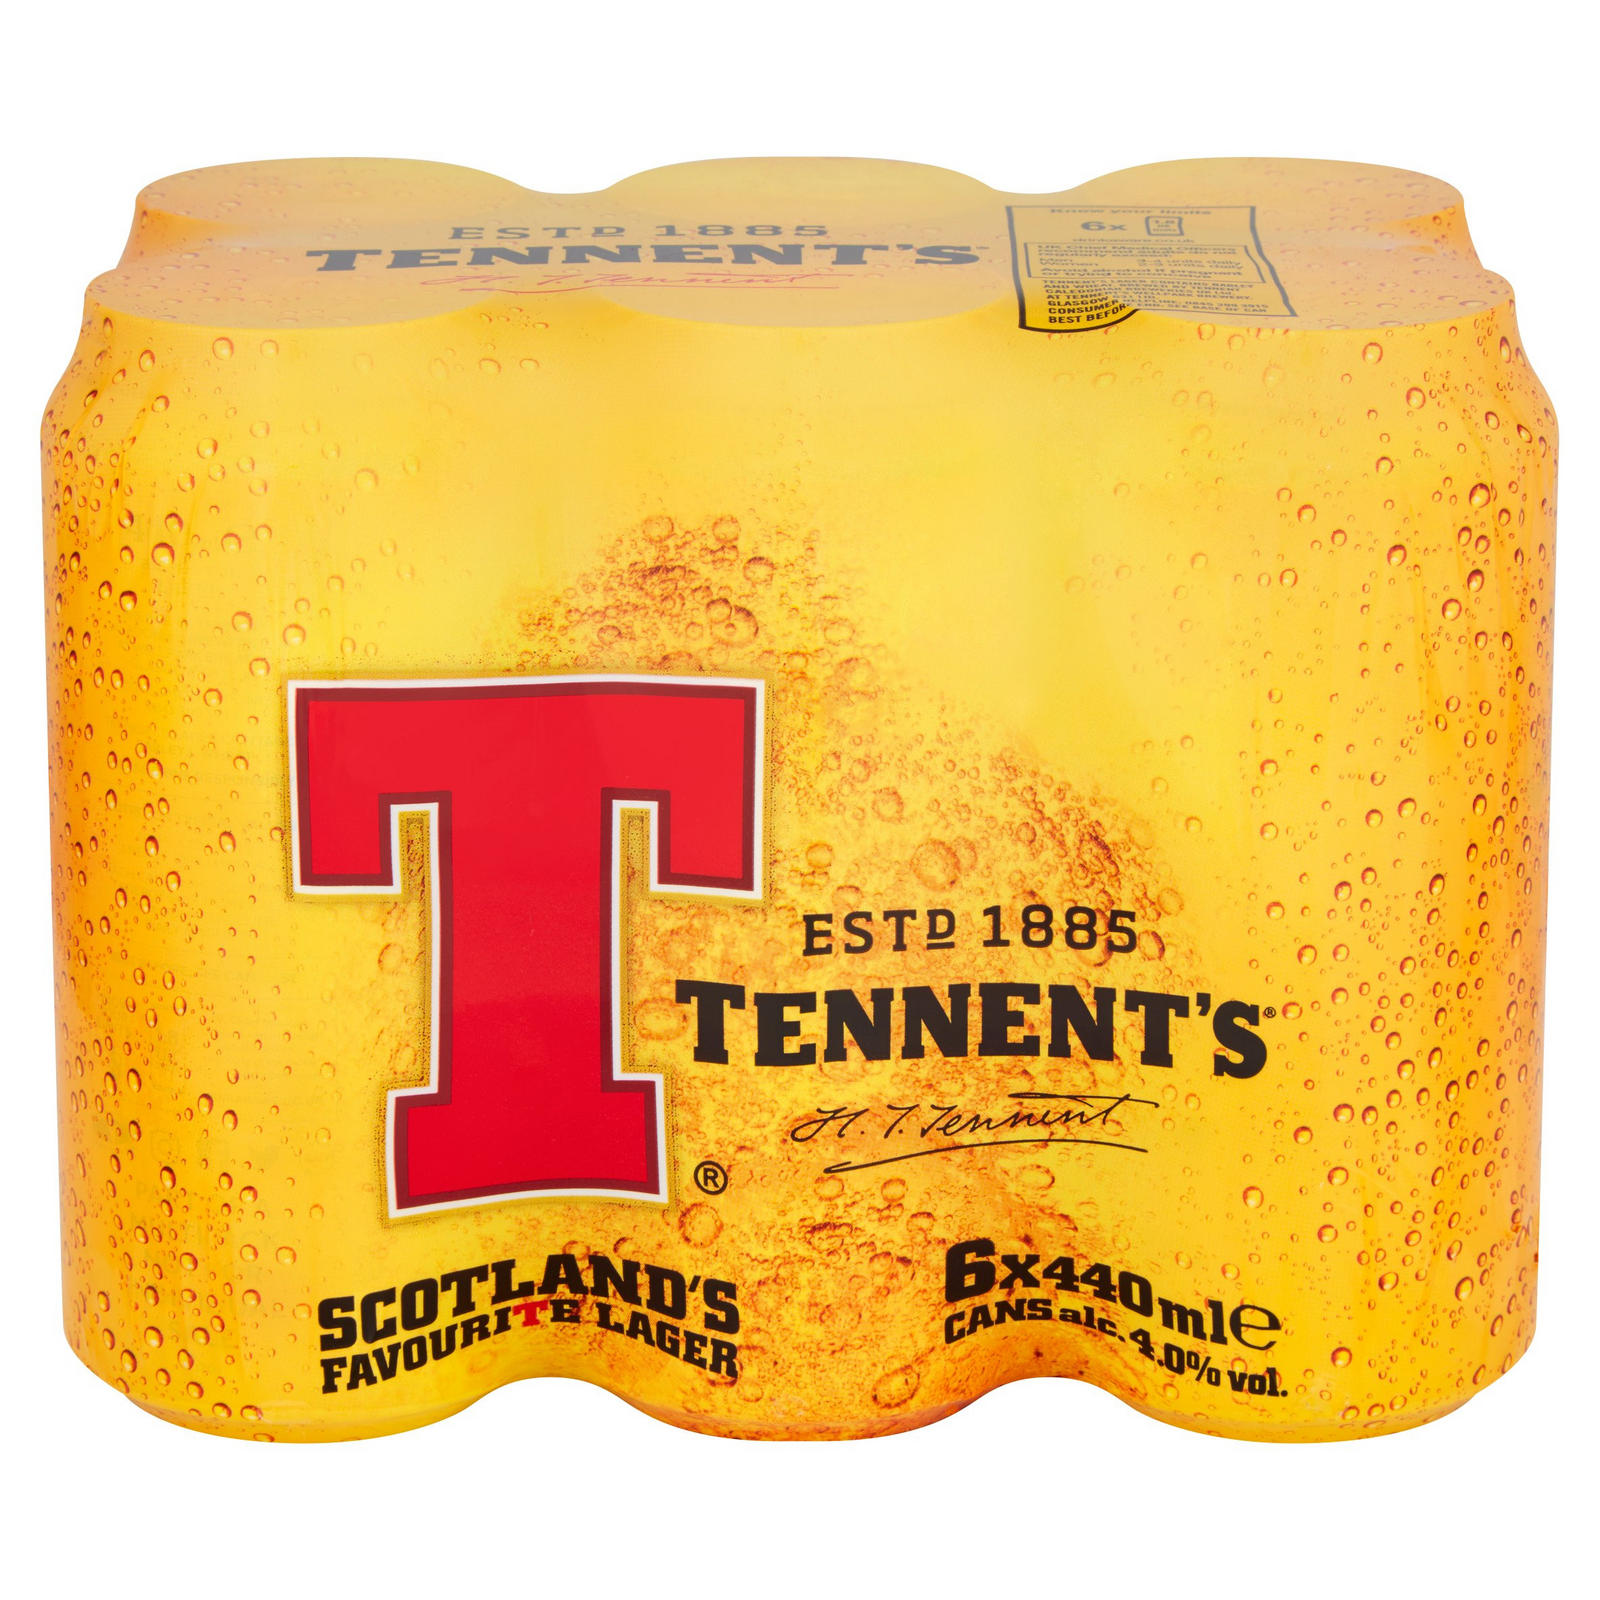 Tennents_6x44_Lager_64978_1.jpg